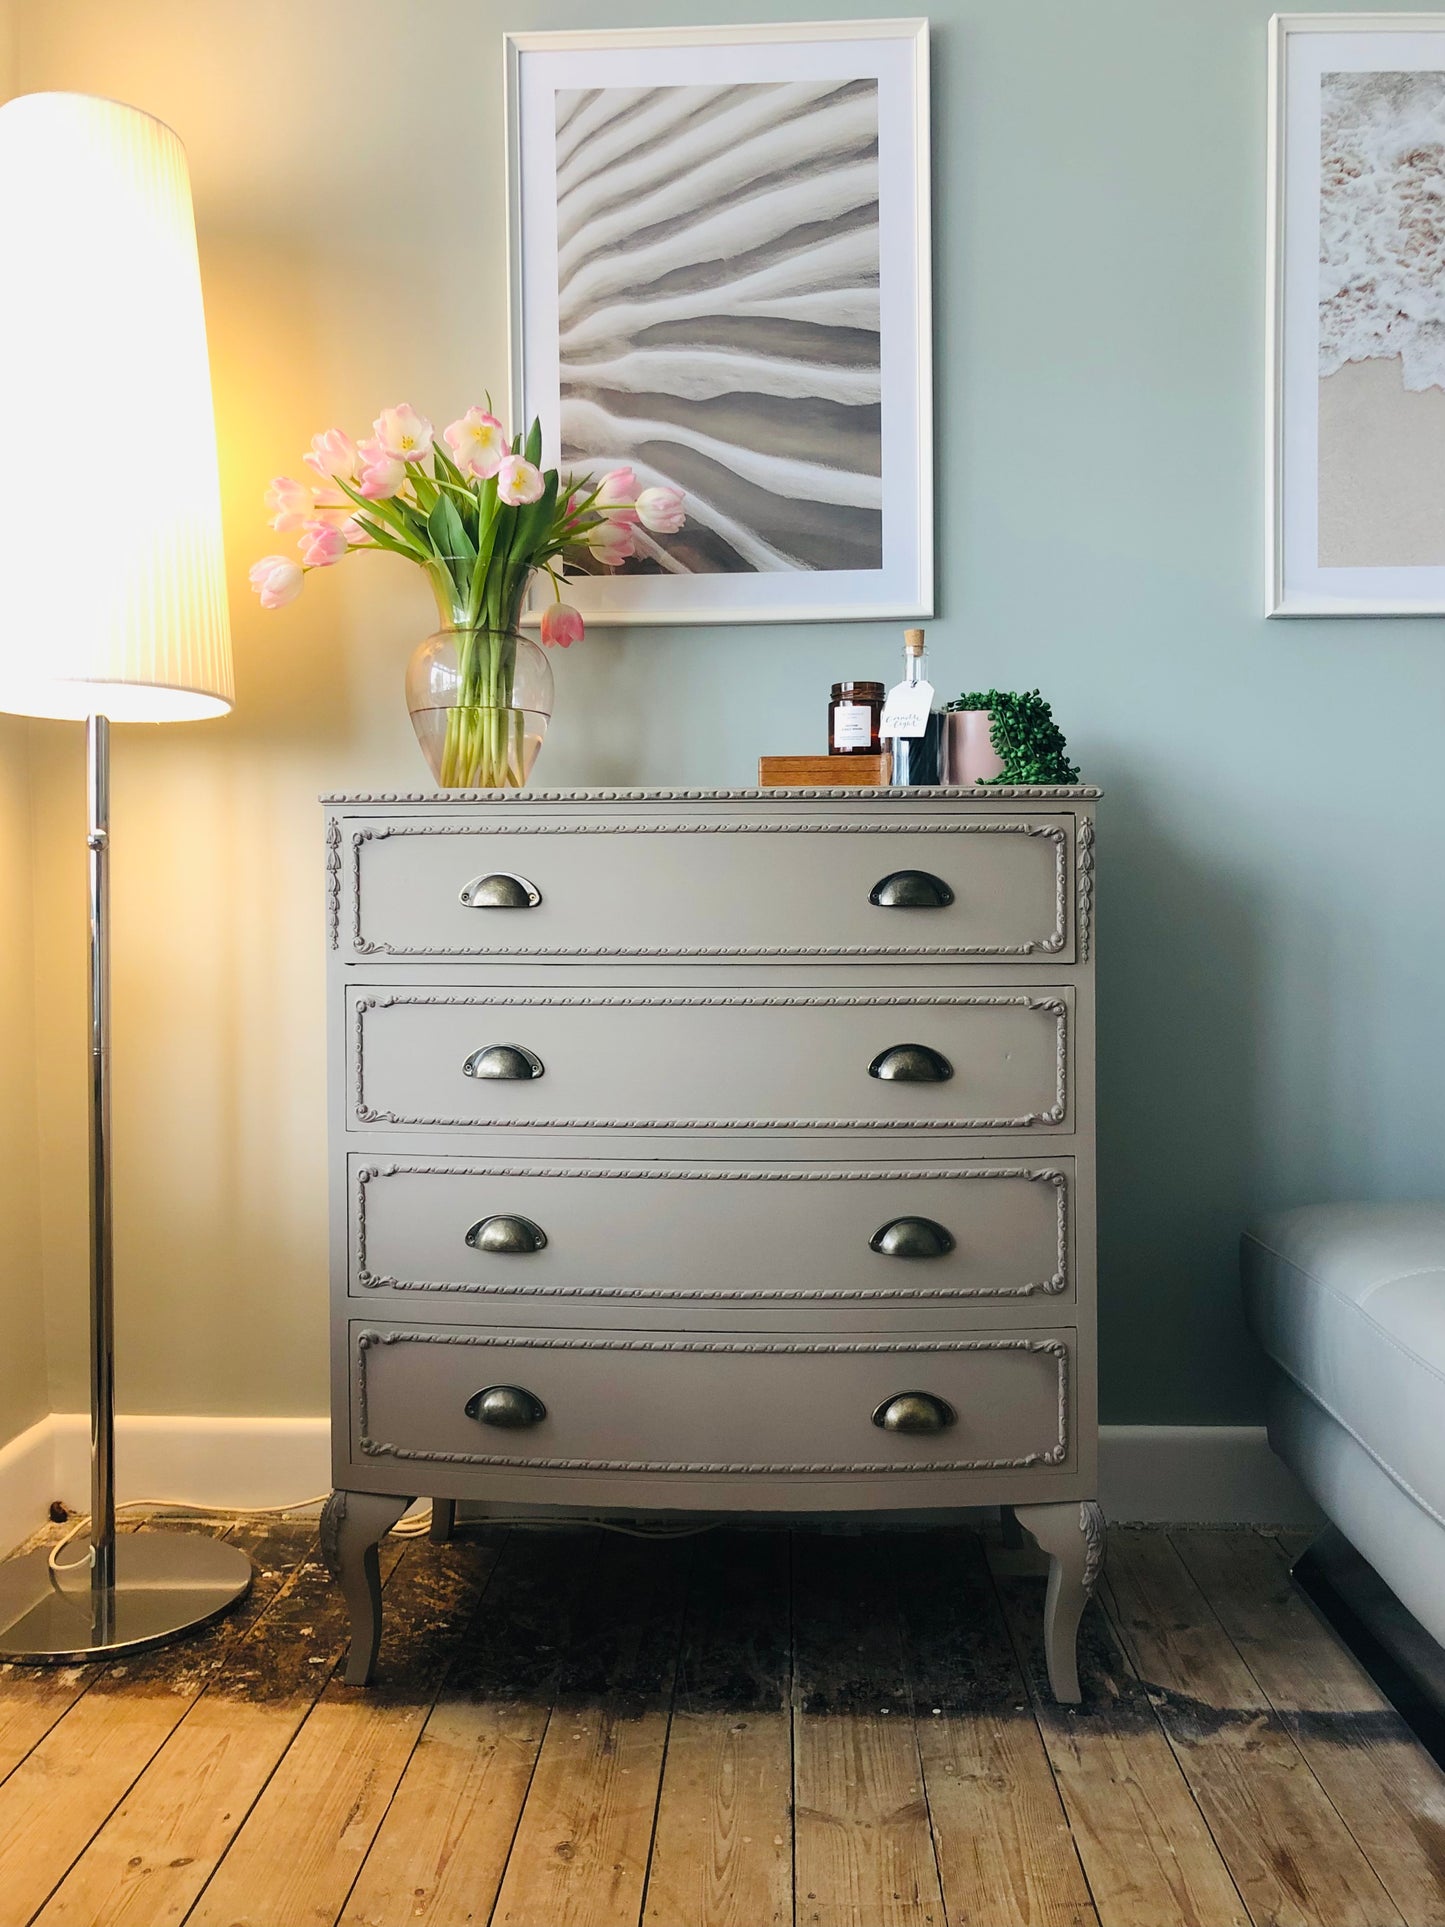 Queen Anne/French style neutral painted vintage chest of drawers with modern cup handles